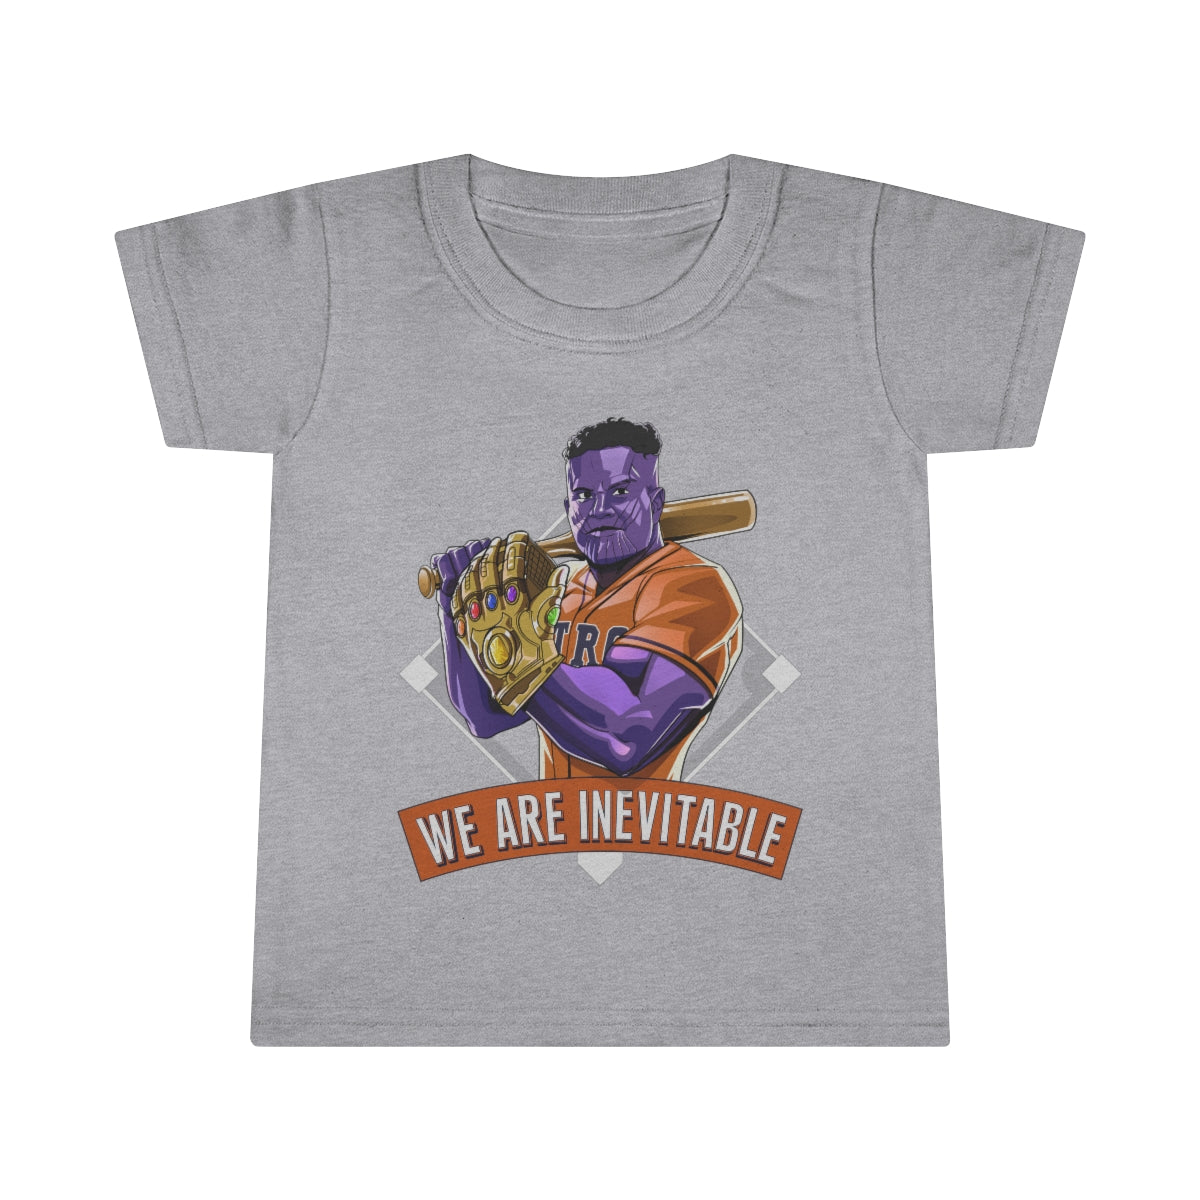 Destiny Arrives All The Same - Toddler Tee Kids Clothes